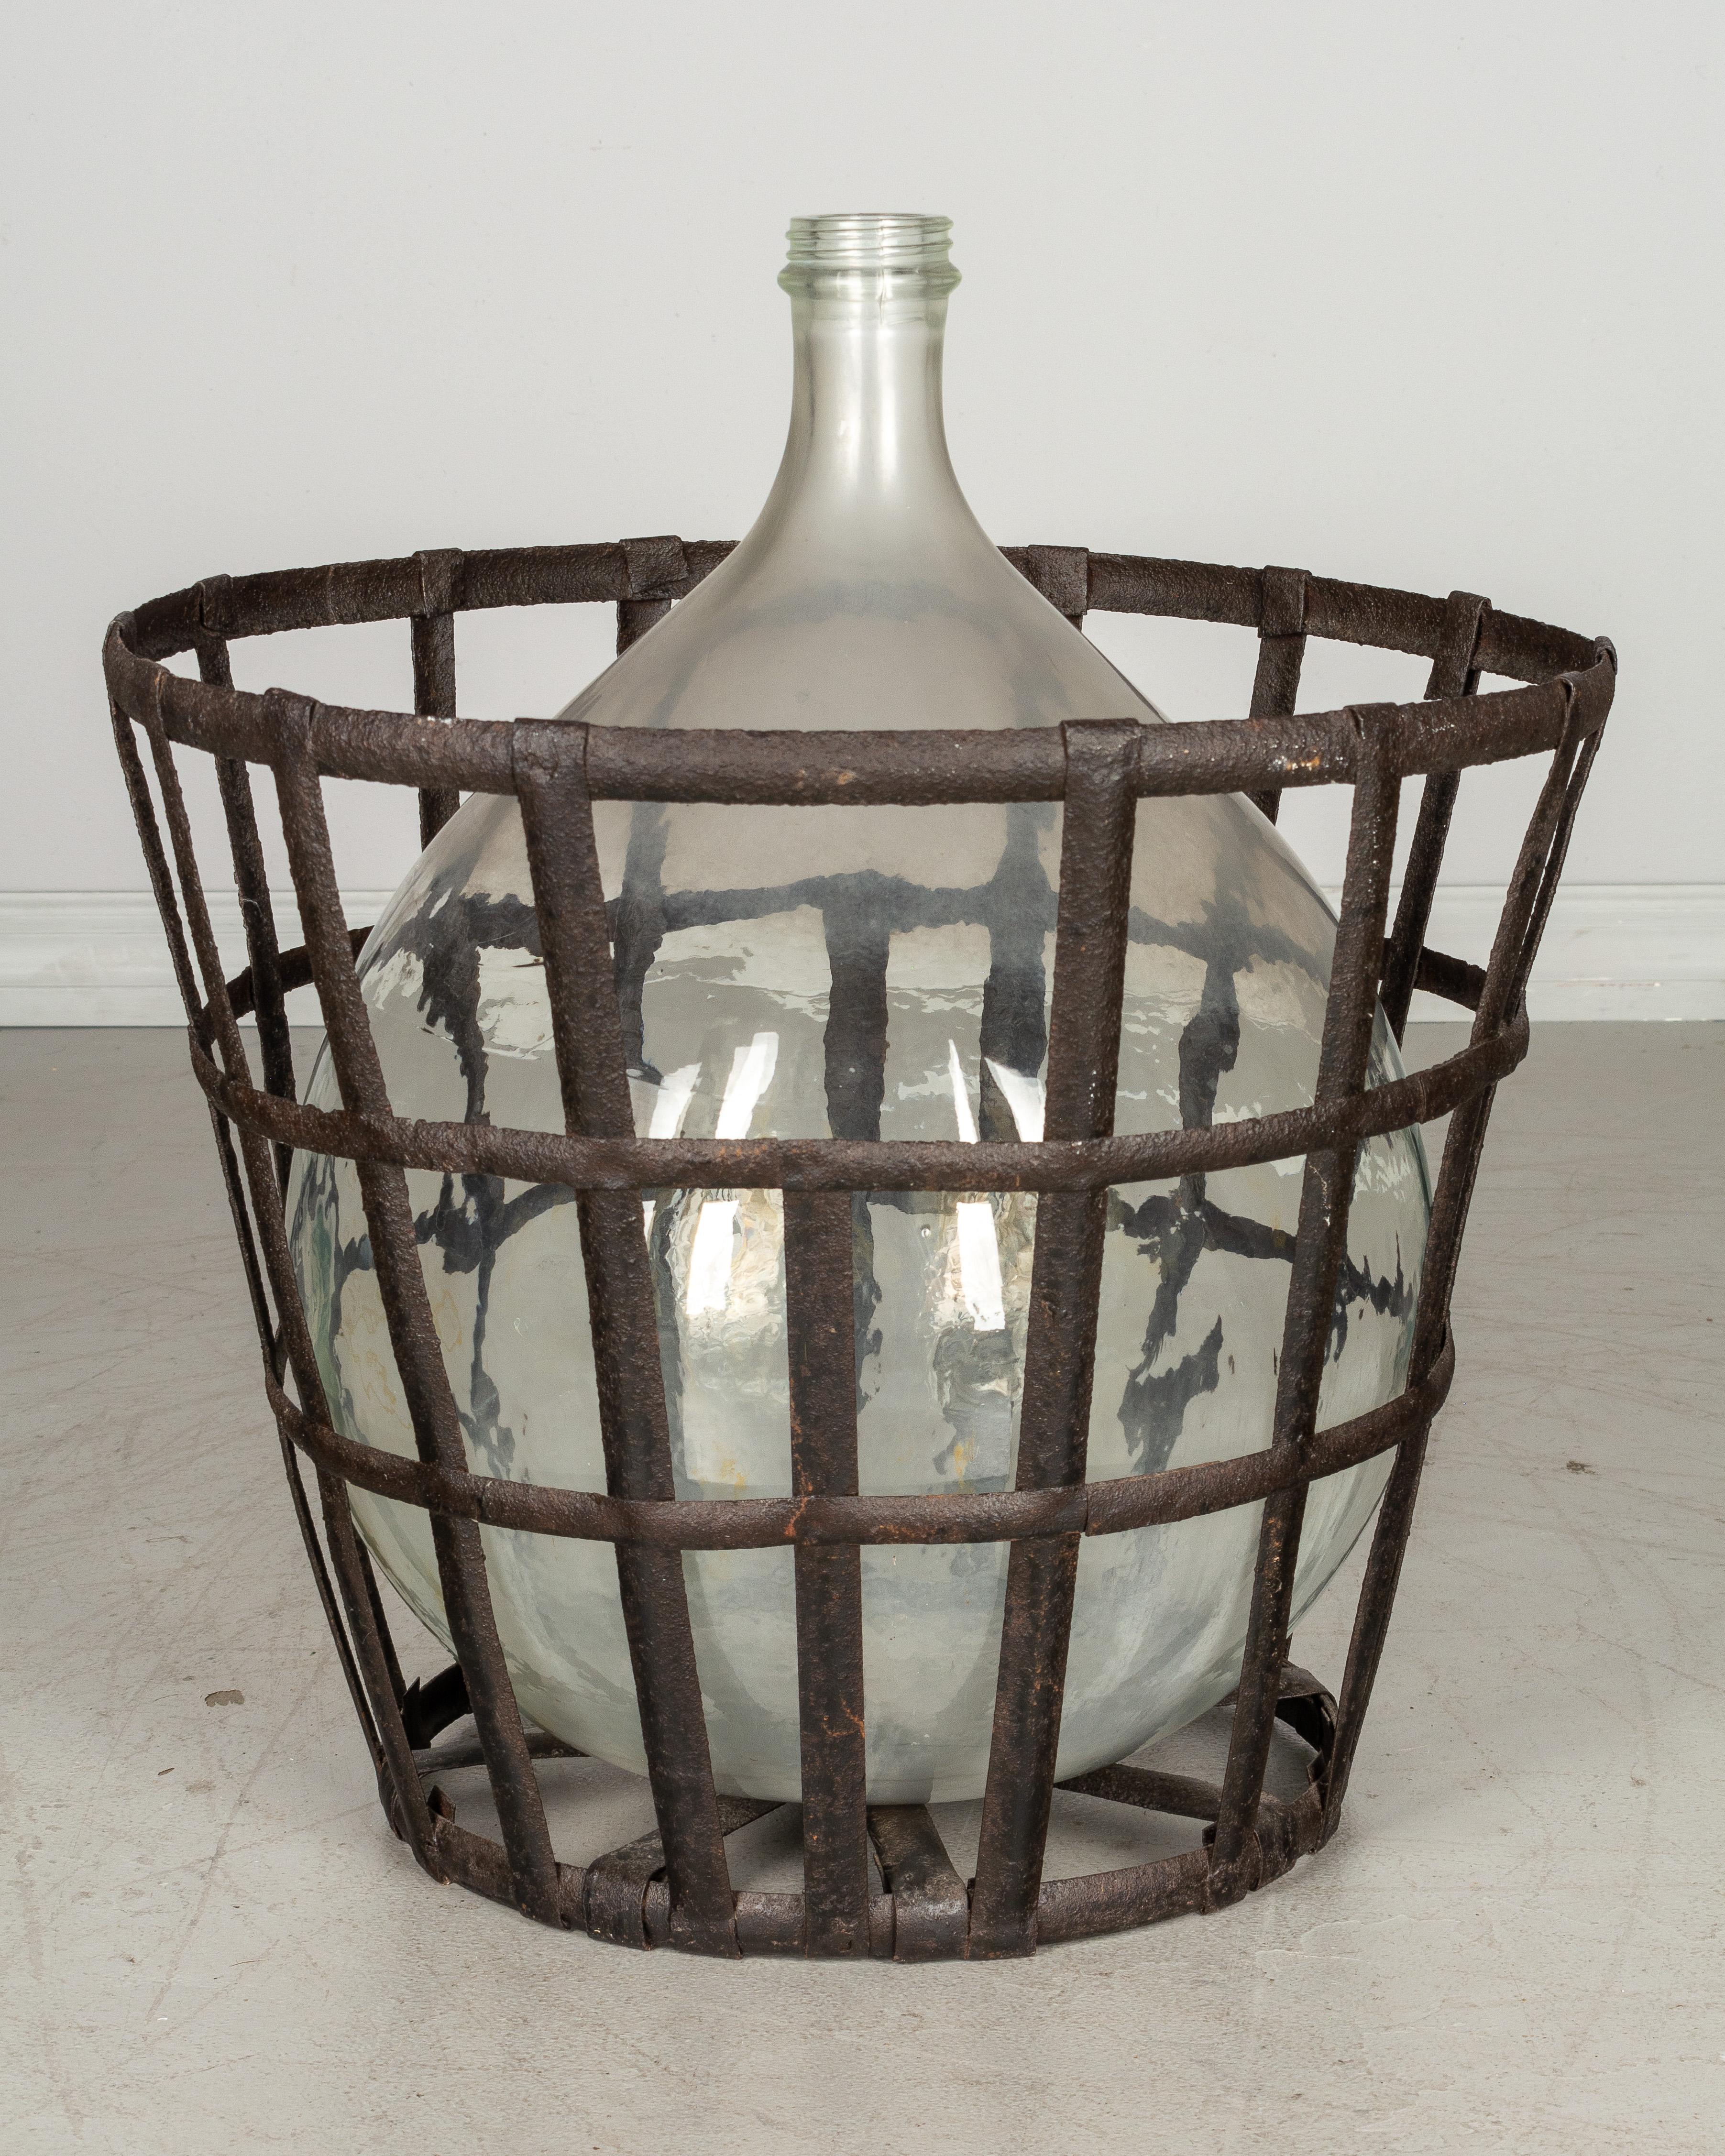 French Provincial French Glass Demijohn Bottle in Metal Basket